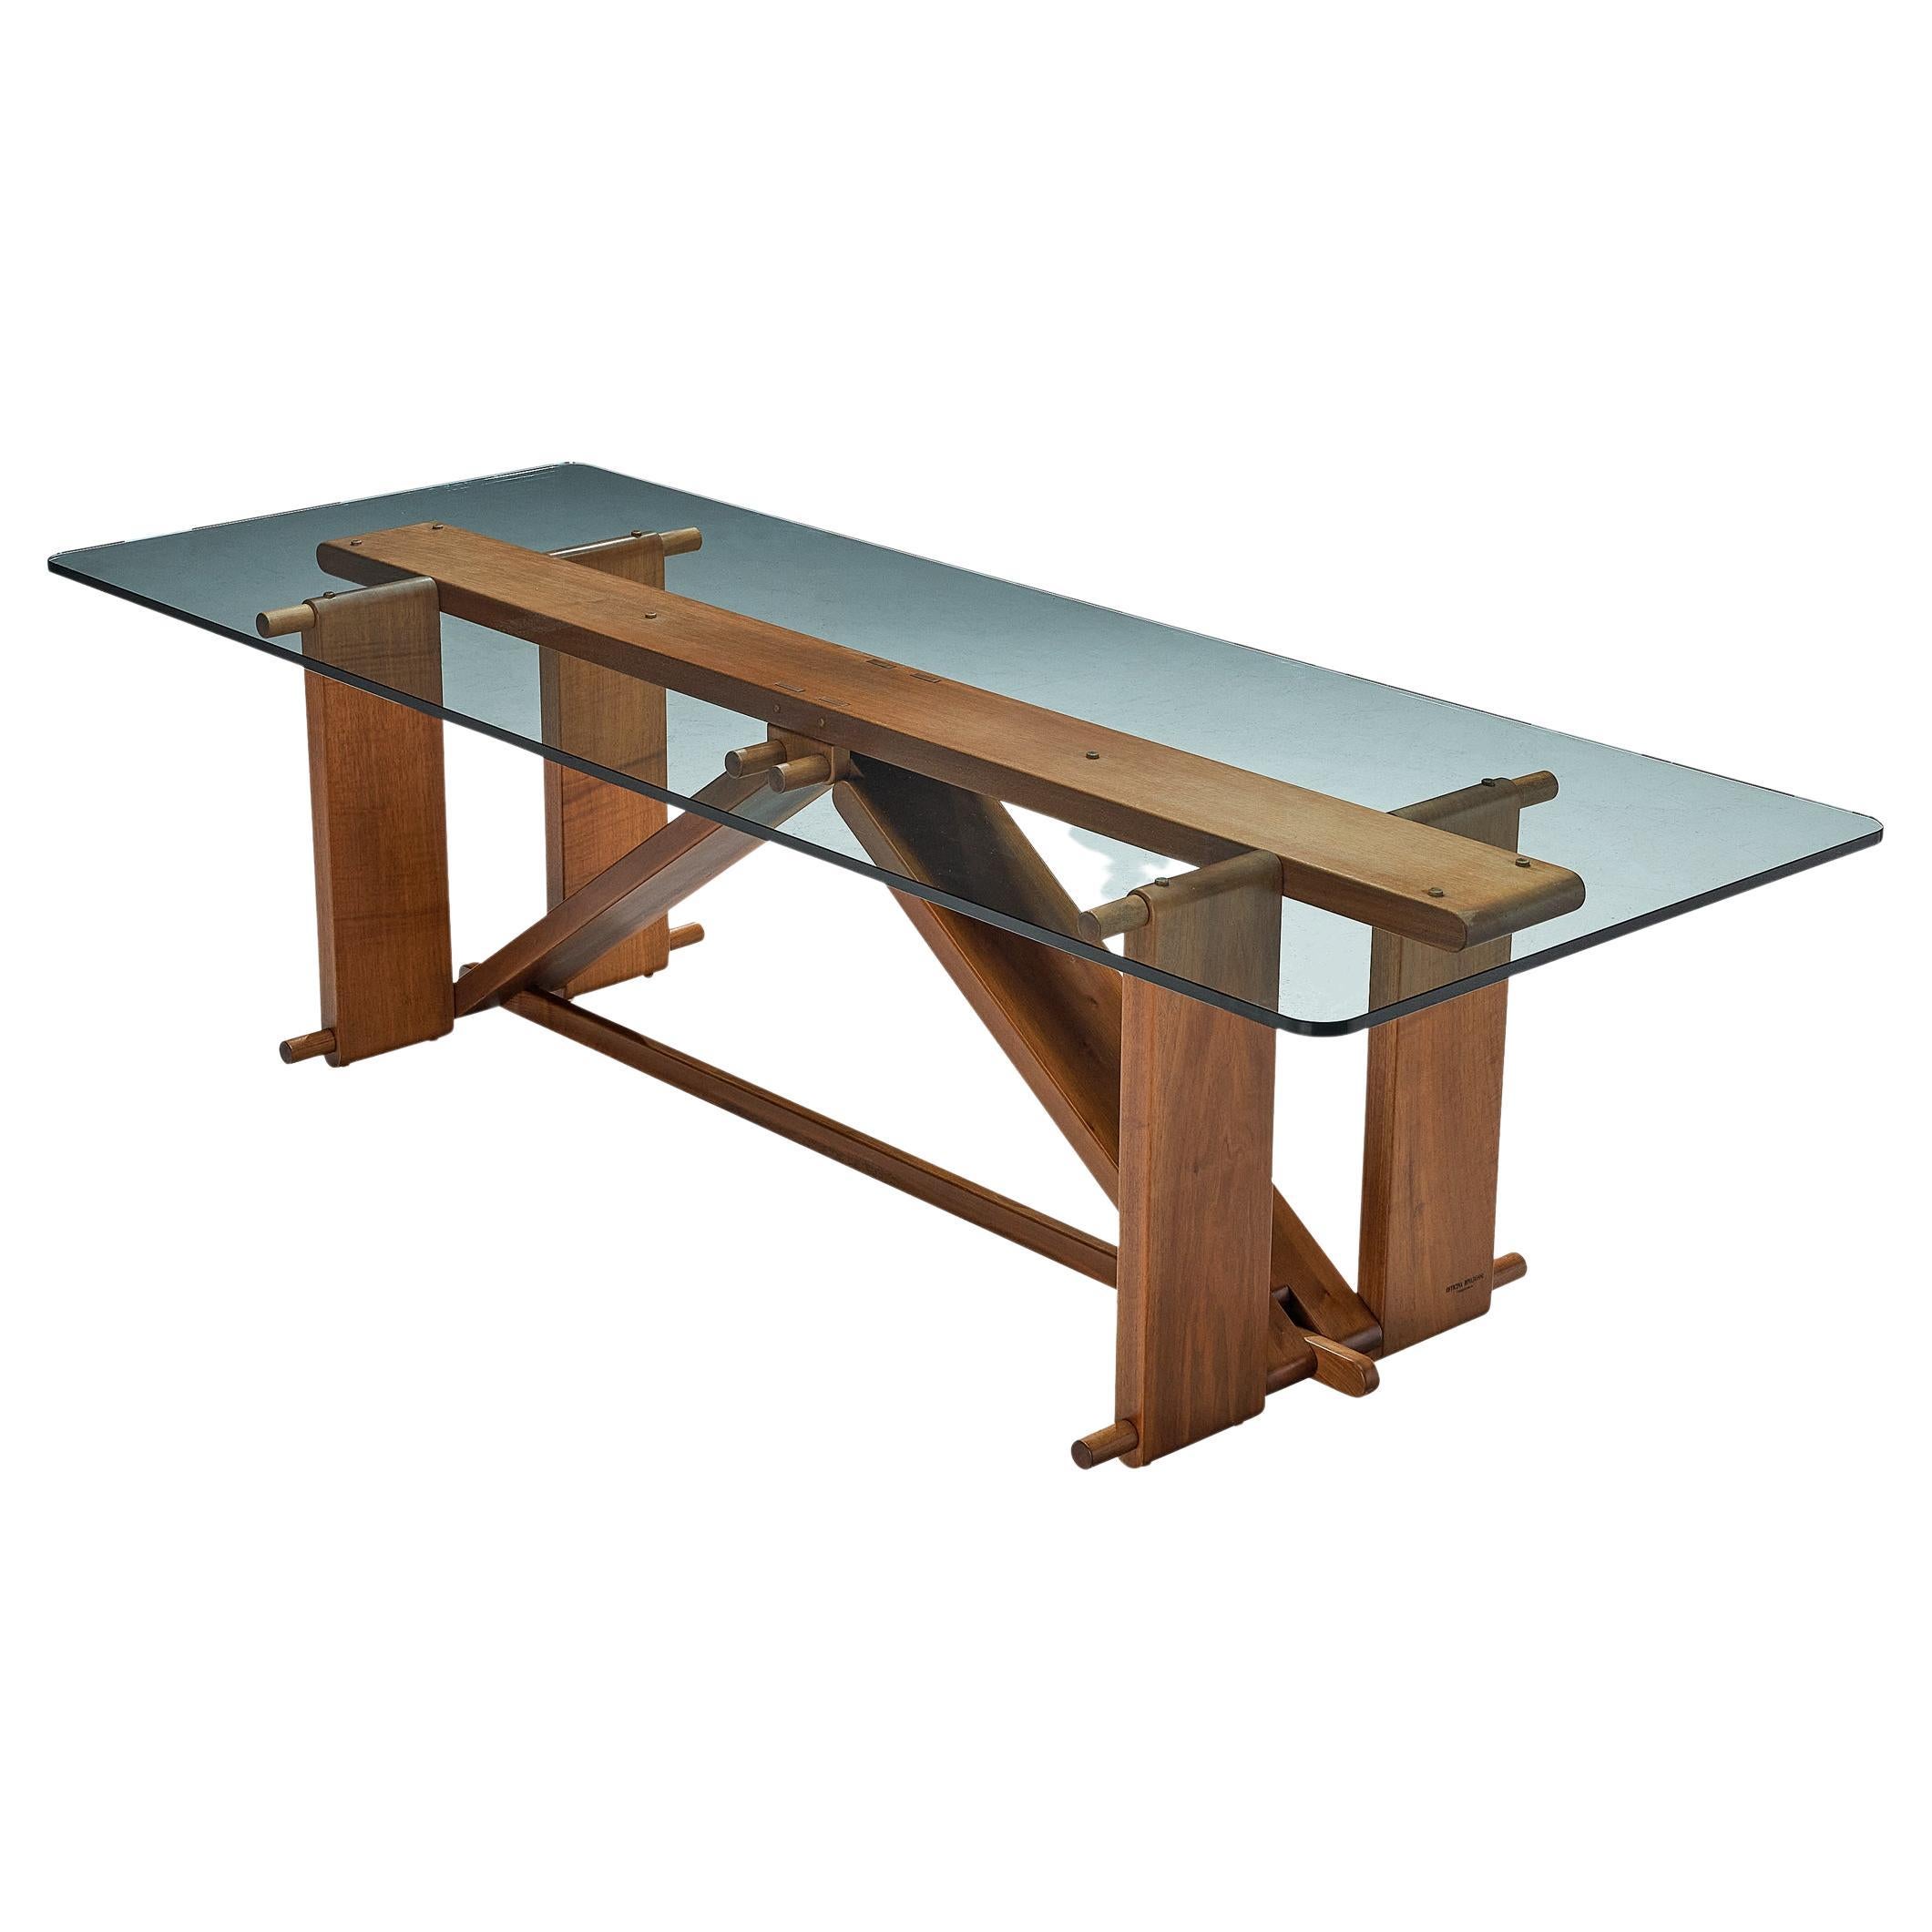 Giuseppe Rivadossi 'Lombardo' Dining Table in Walnut and Glass